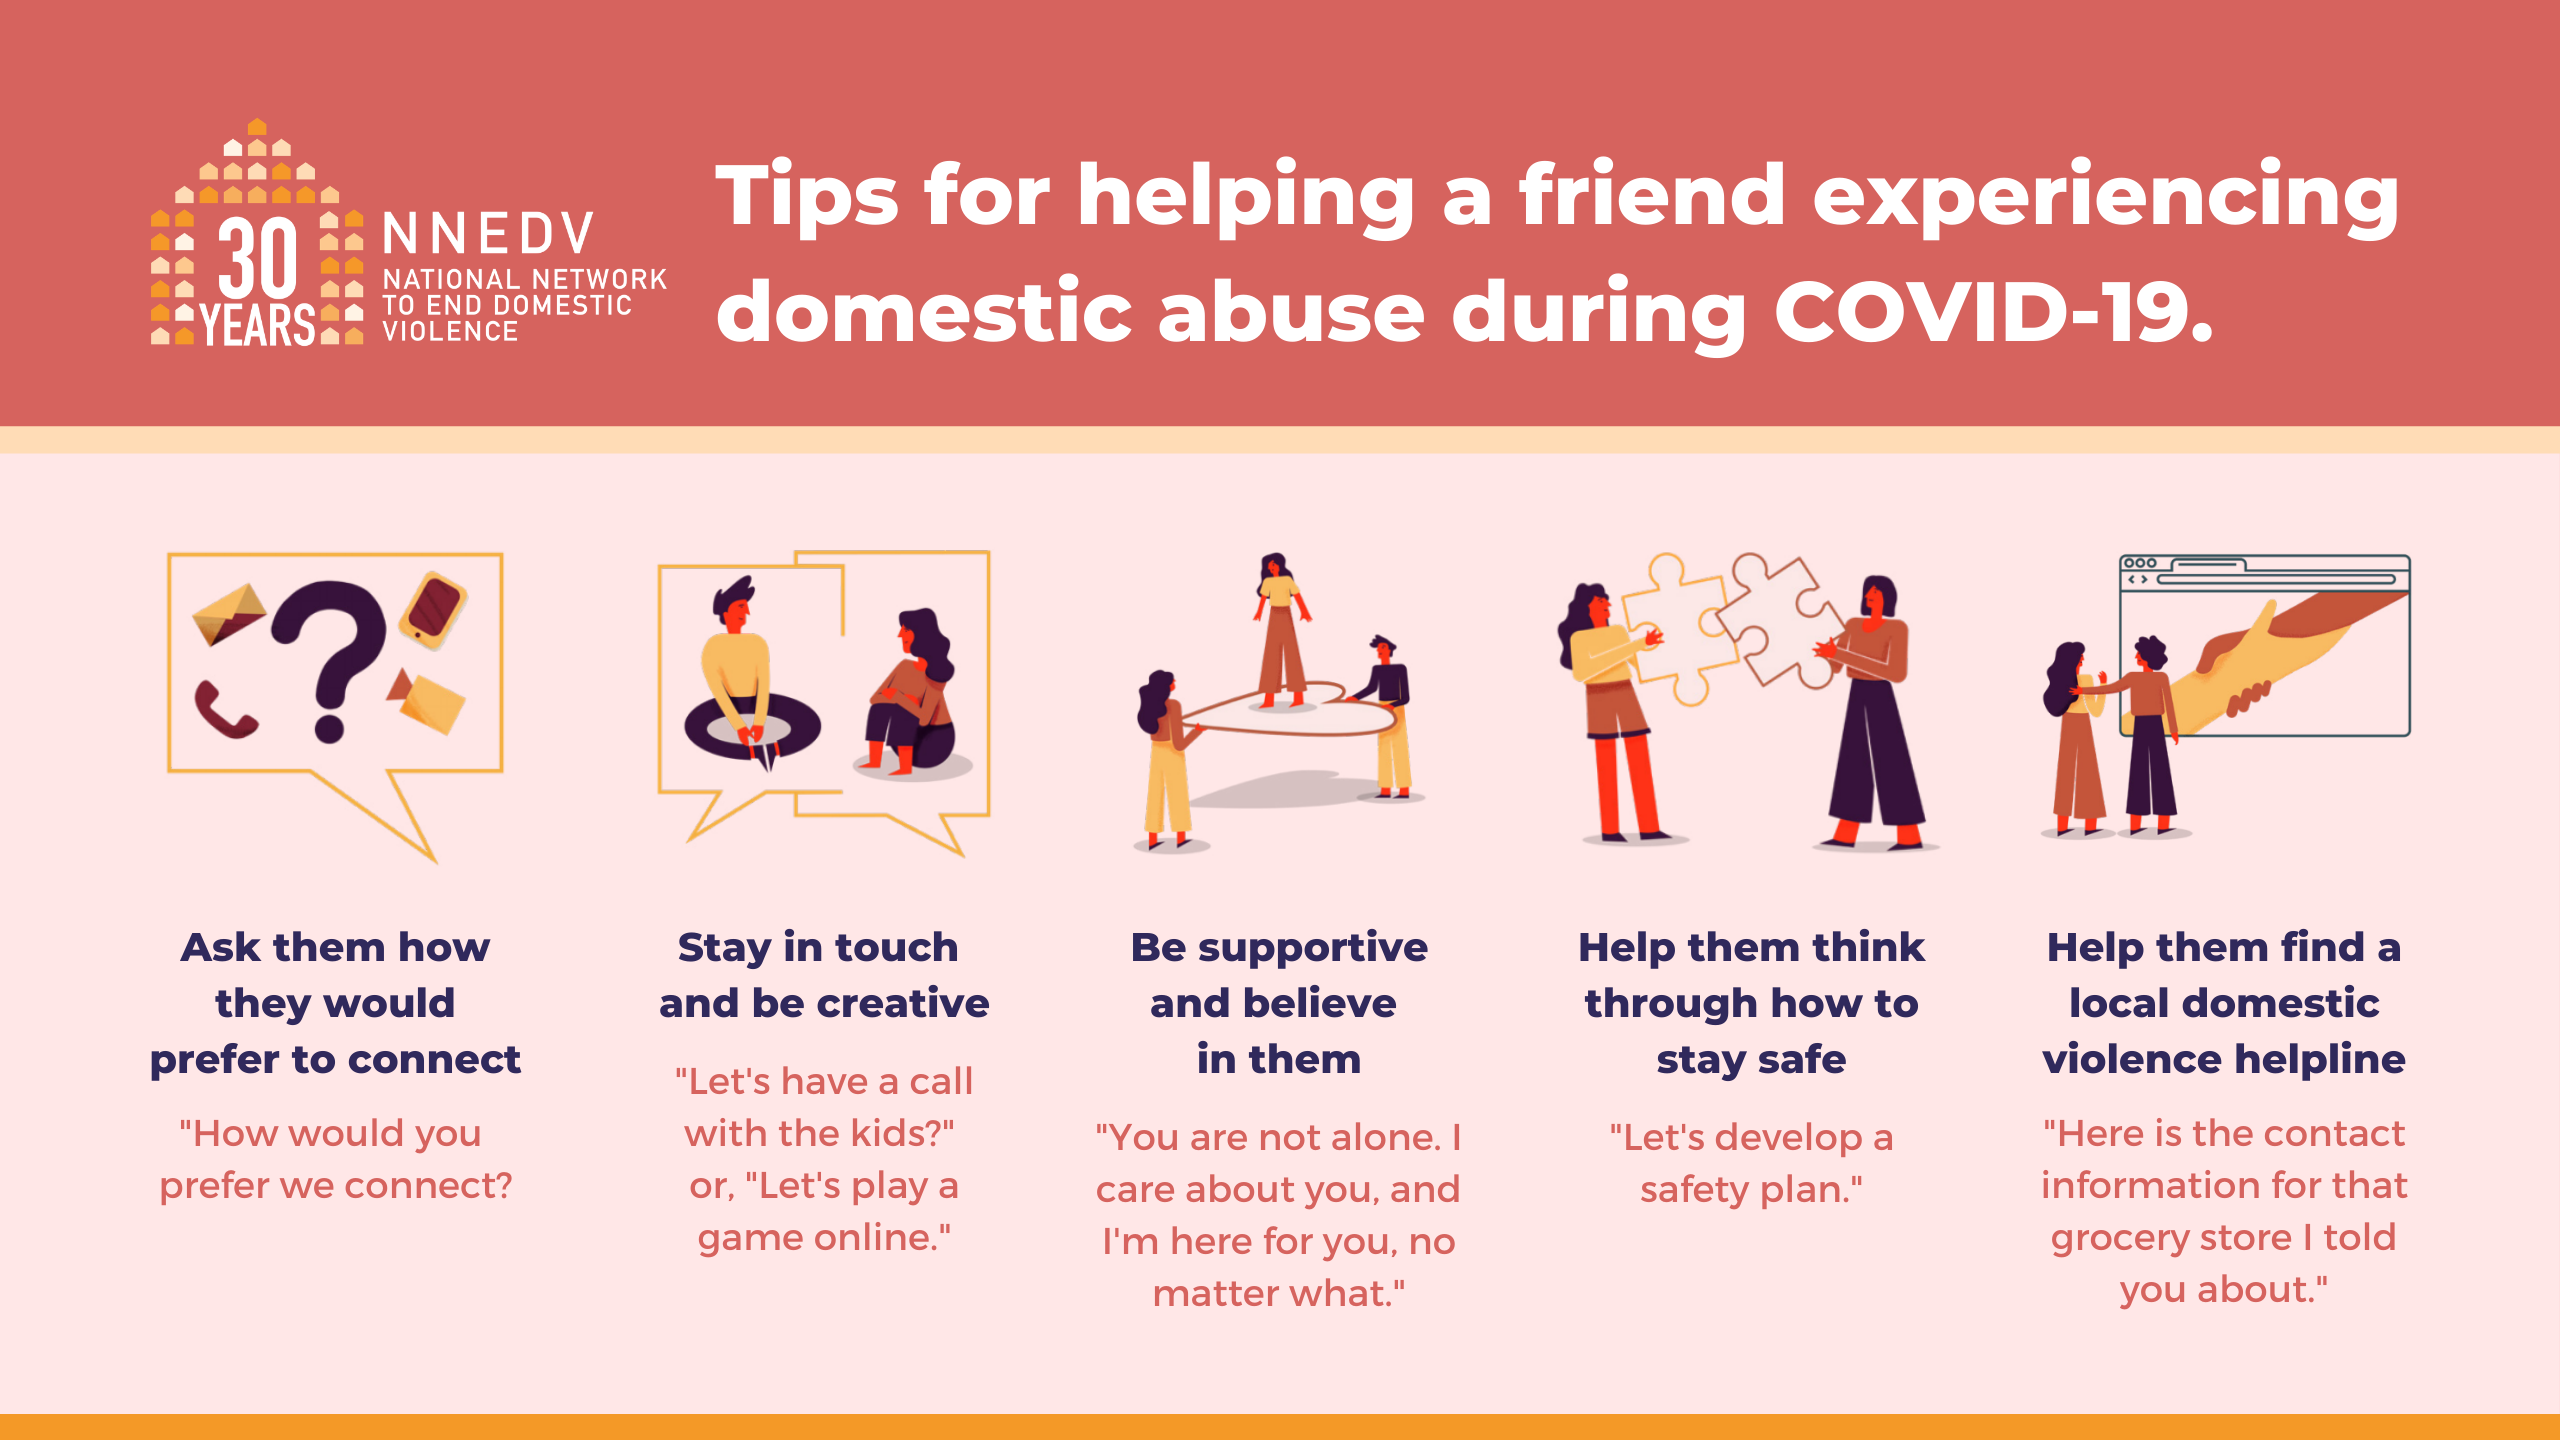 Tips for Helping a Friend Experiencing Domestic Abuse